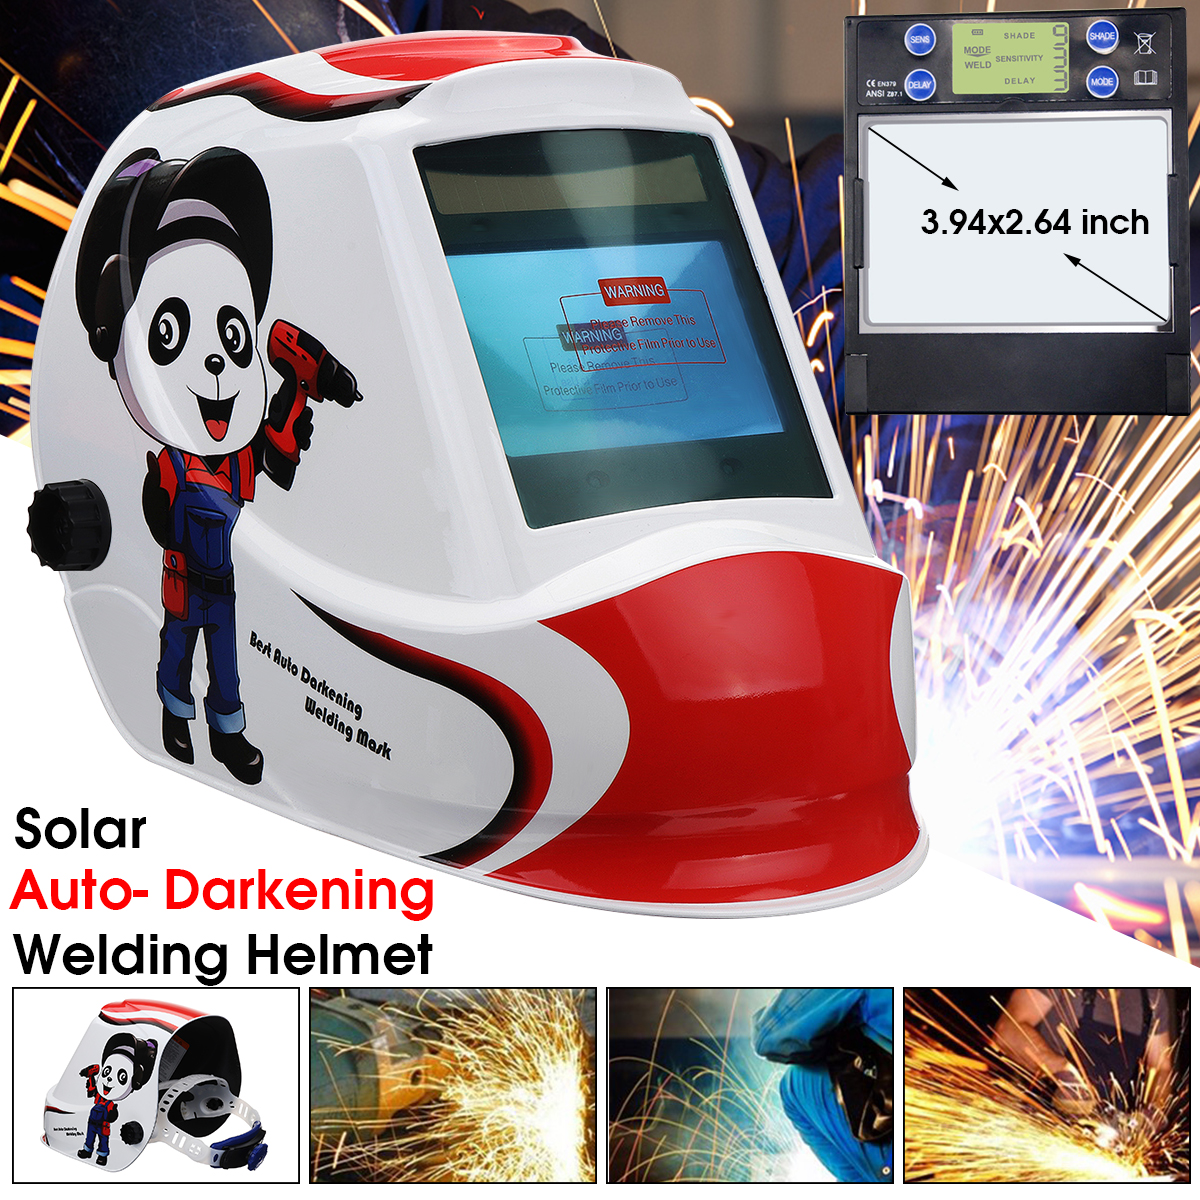 Solar-Power-Automatic-Dimming-Welding-Helmet-Welding-Mask-Large-Vision-Window-1430637-1